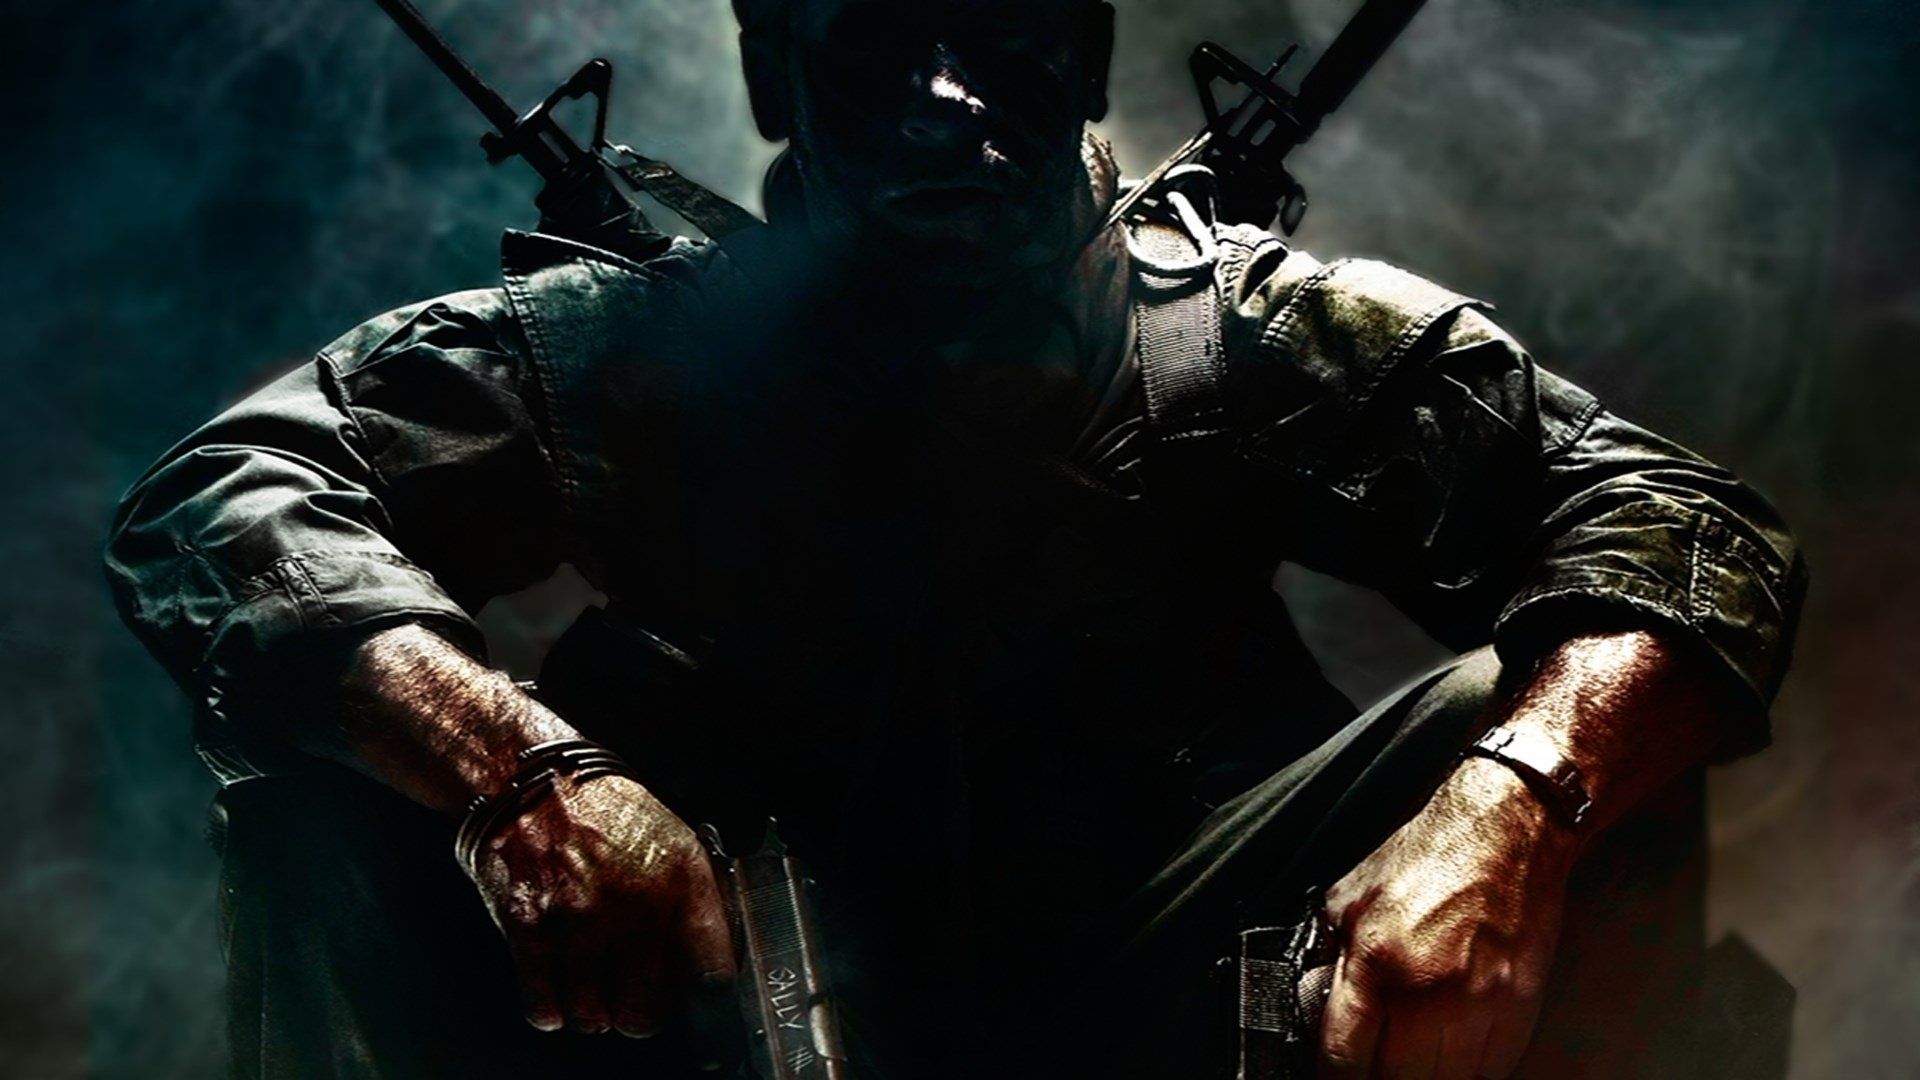 Call of Duty: Black Ops Cold War is coming this year